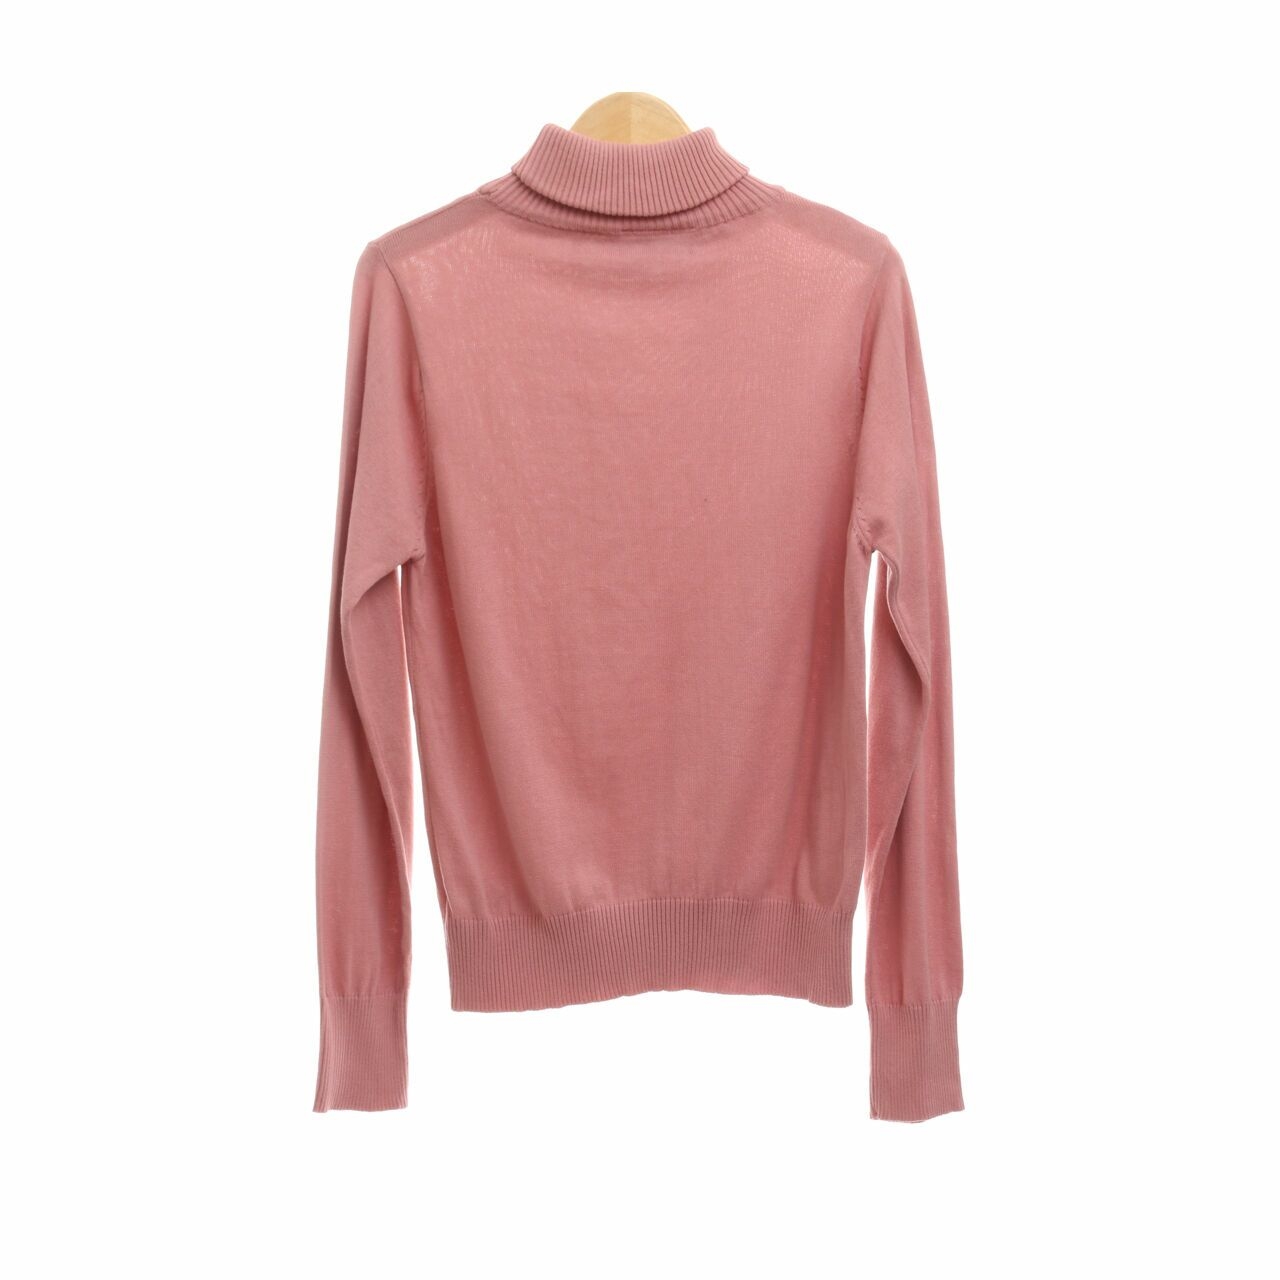 ATS The Label Pink Turtle Neck Sweater